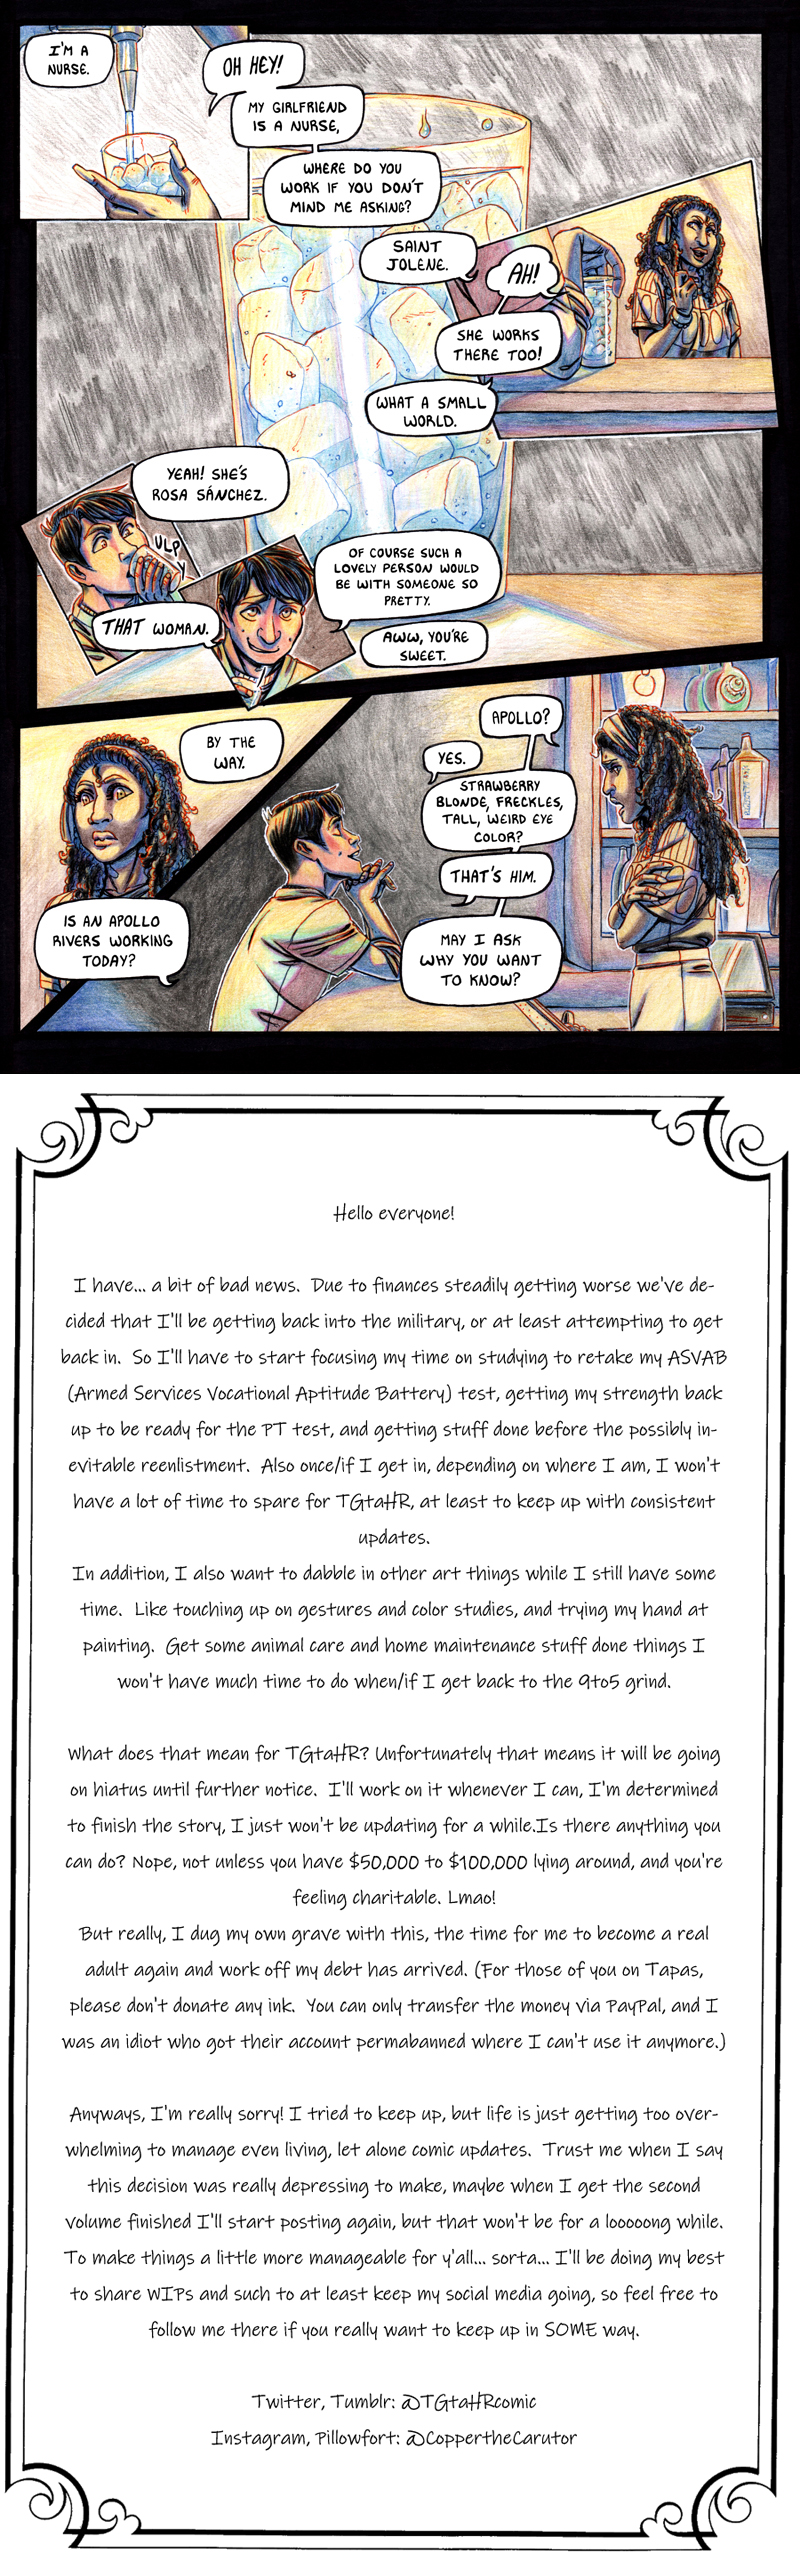 Chapter 6, pg. 33